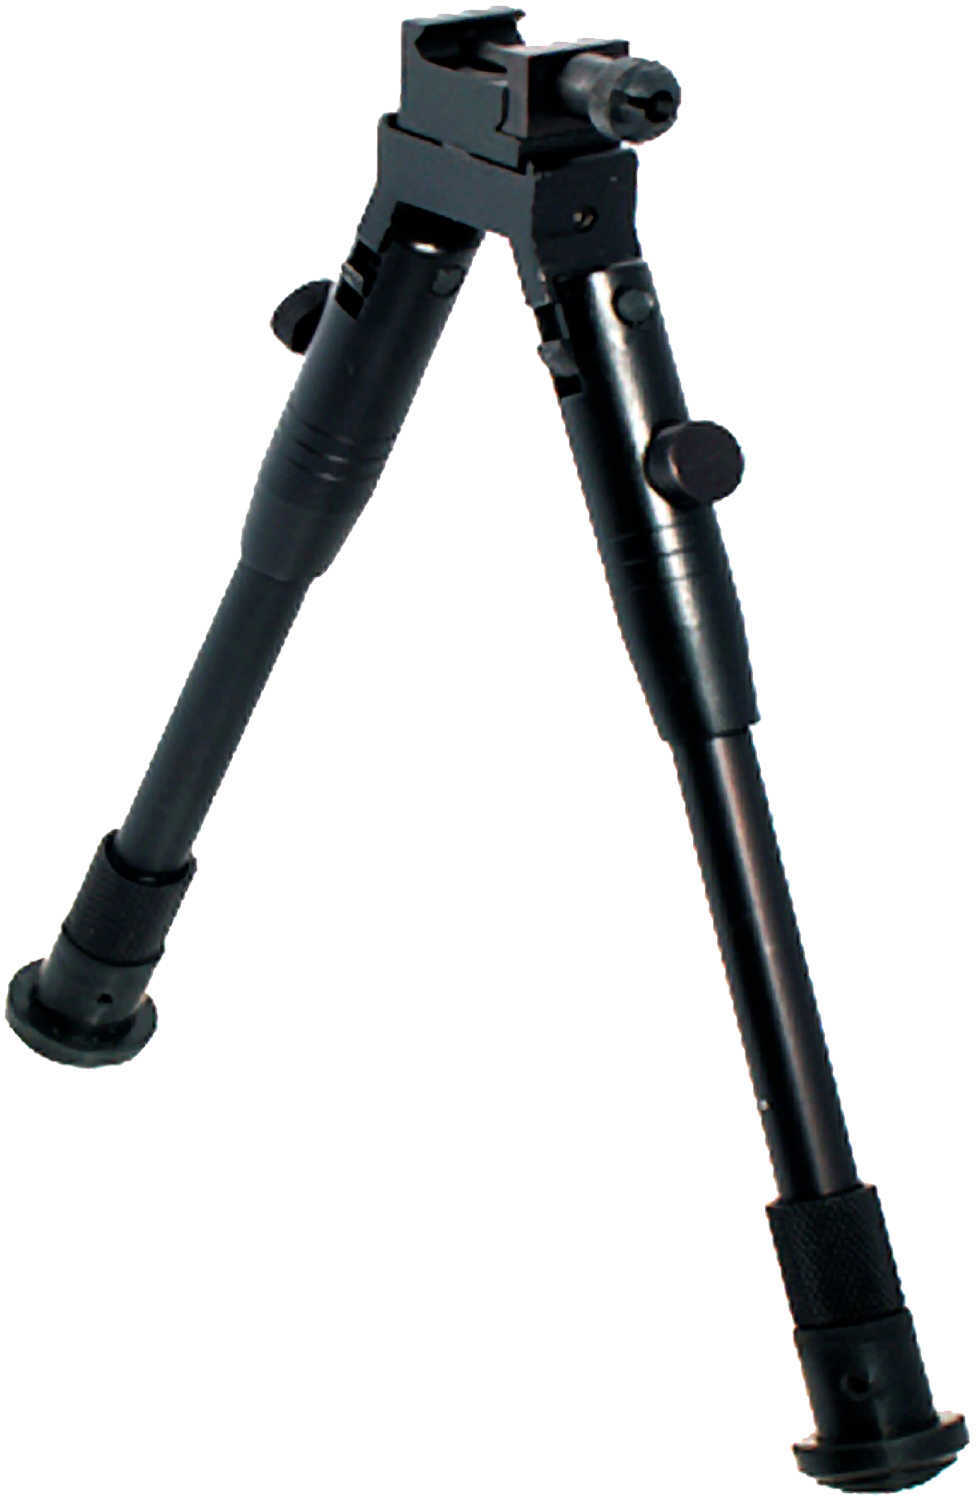 Leapers Inc. - UTG Universal Shooter's Bipod Fits Picatinny Rail or Swivel Stud 8.7" - 10.6" Tactical/Sniper Profile wit